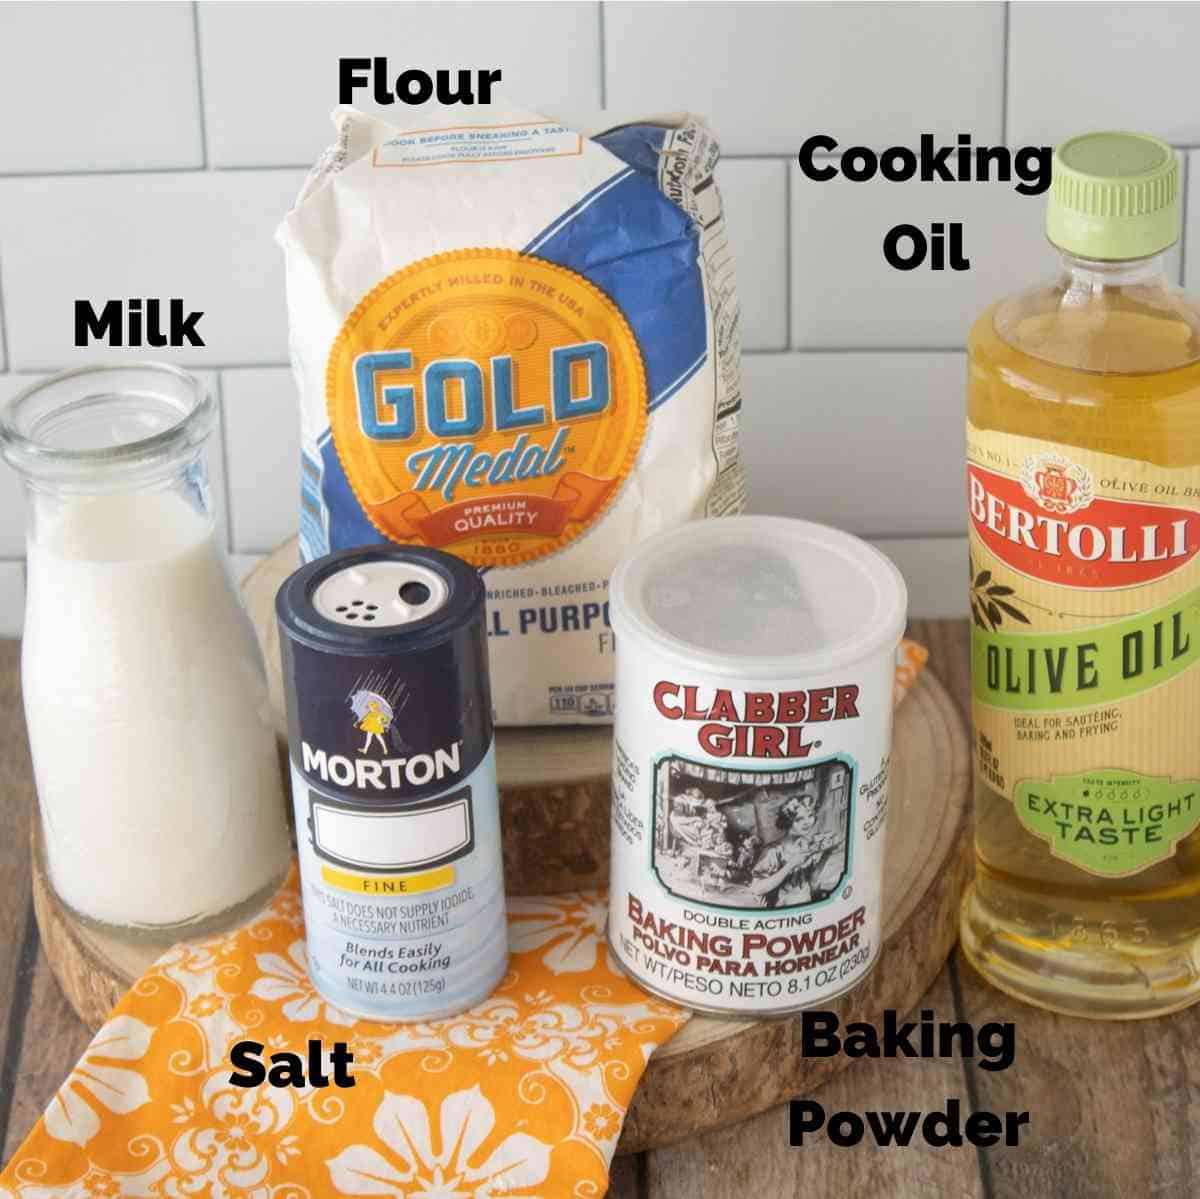 Simple ingredients for this fried scone recipe!